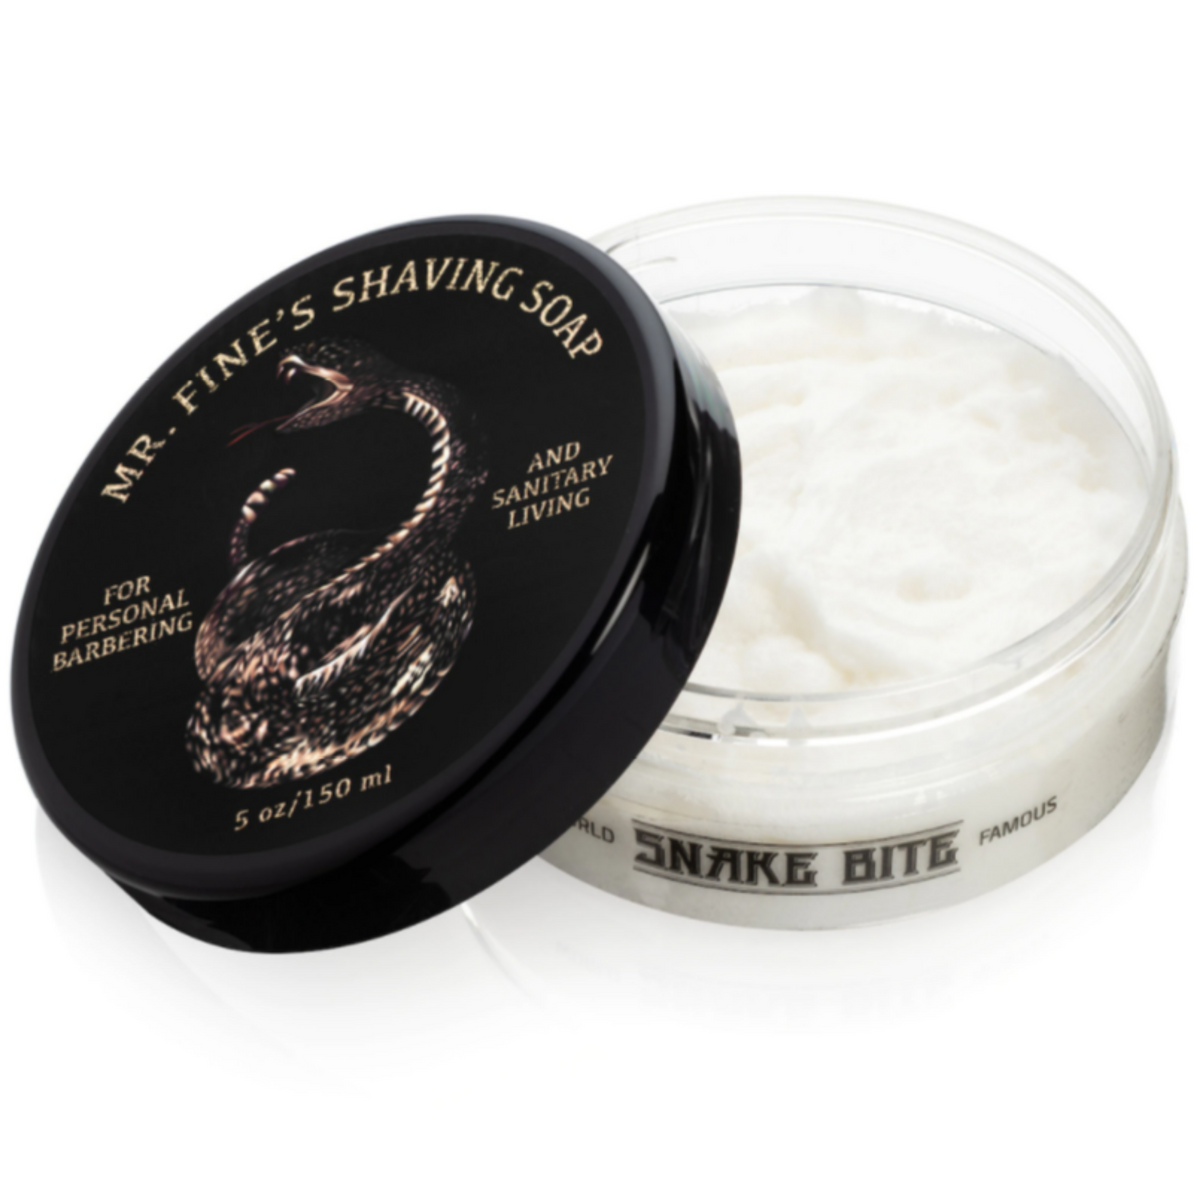 Primary image of Snake Bite Shave Soap